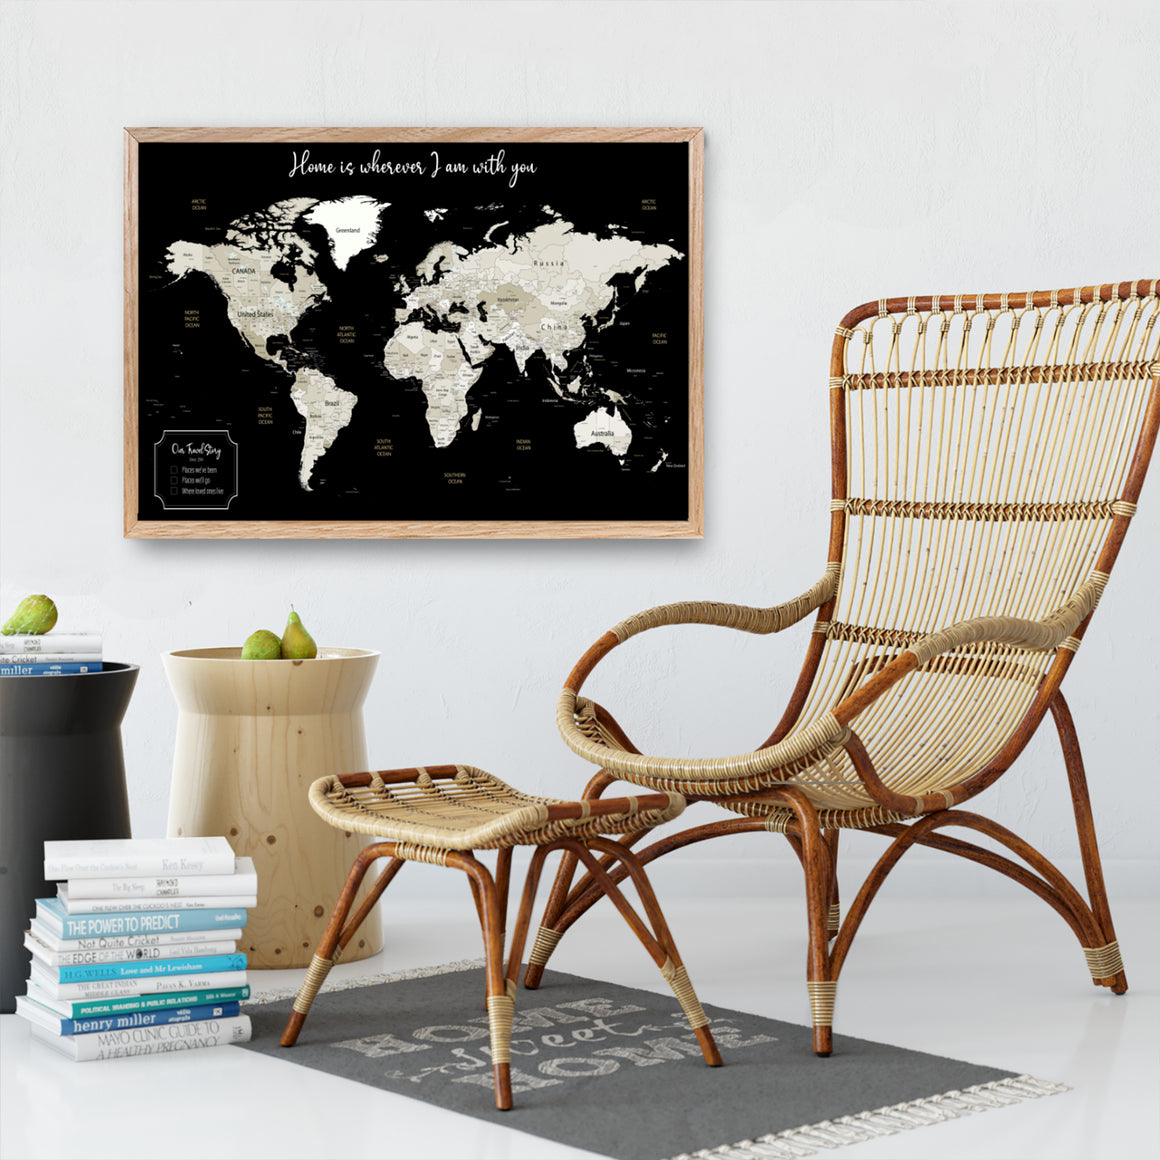 Personalised World Map Framed Pin Board in Black & Whites is a Travel Map Poster Gift. Personalise this Map of the world with an inspirational quote or family names, and track past and future travels by placing pins on the destinations of choice. Available in Large World Map B1, or A1, A2 sizes and Framed in Oak, Black or White frames